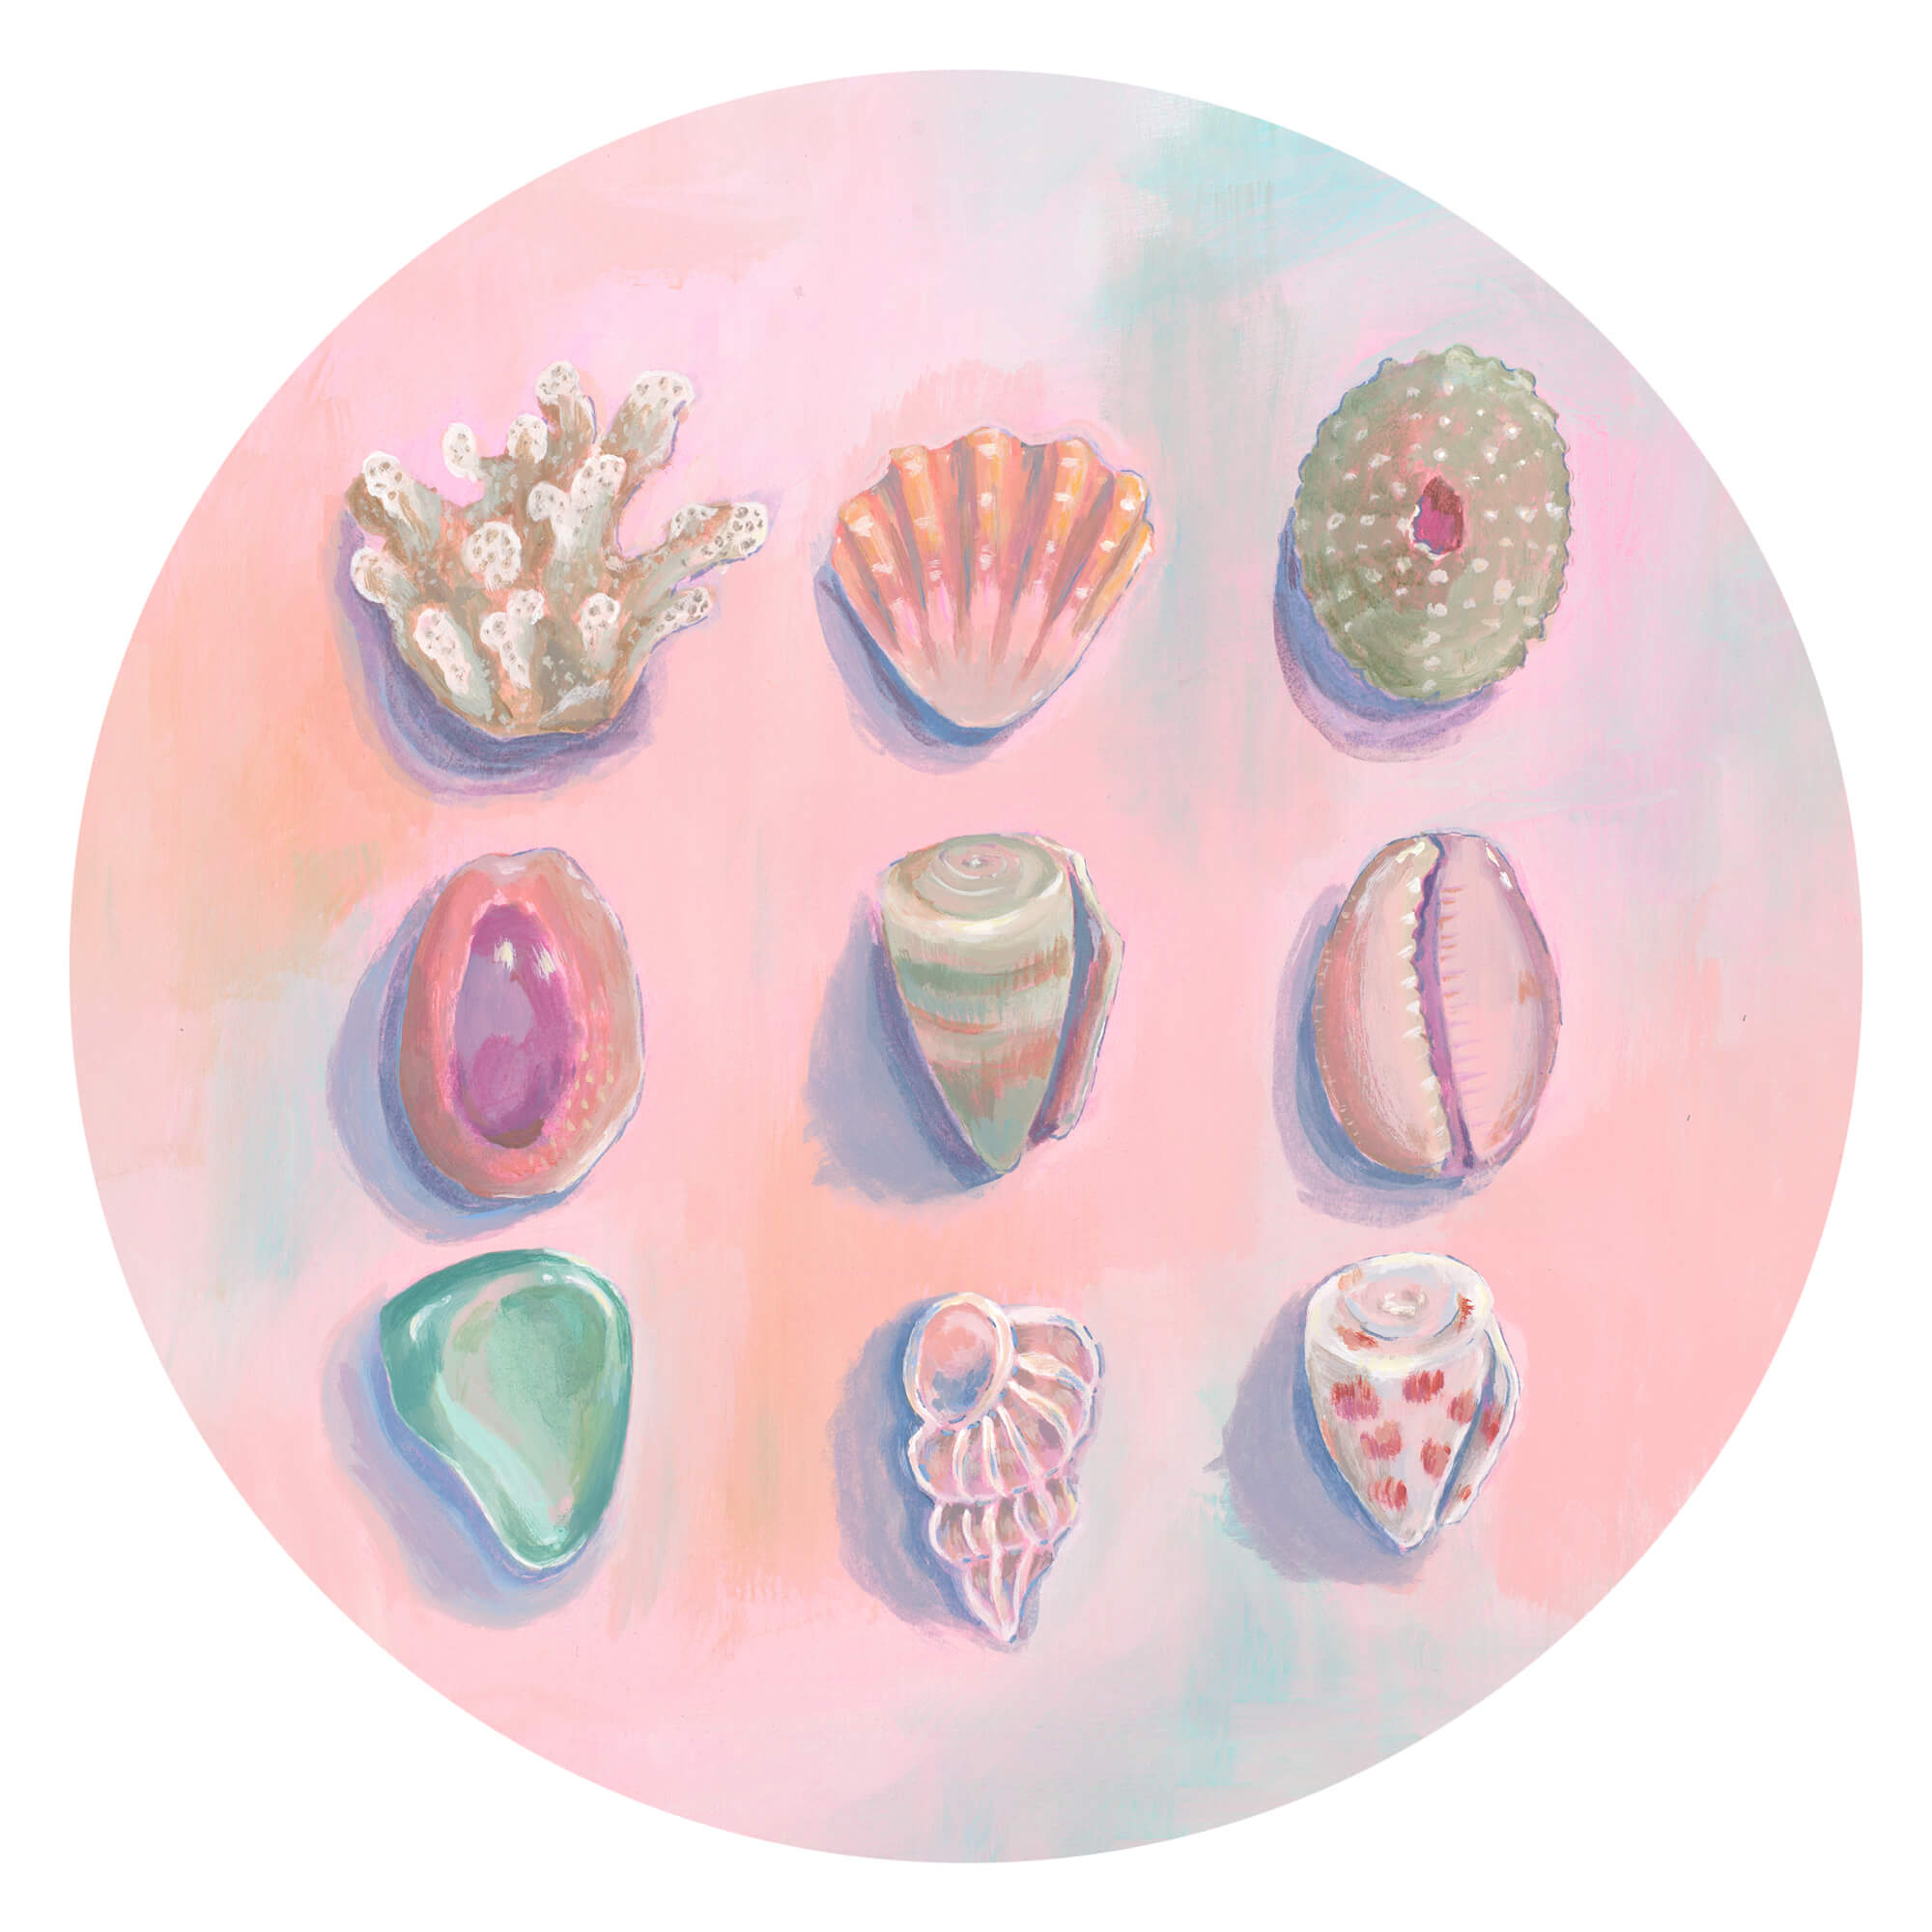 Different kinds of seashells and corals by Hawaii artist Lindsay Wilkins